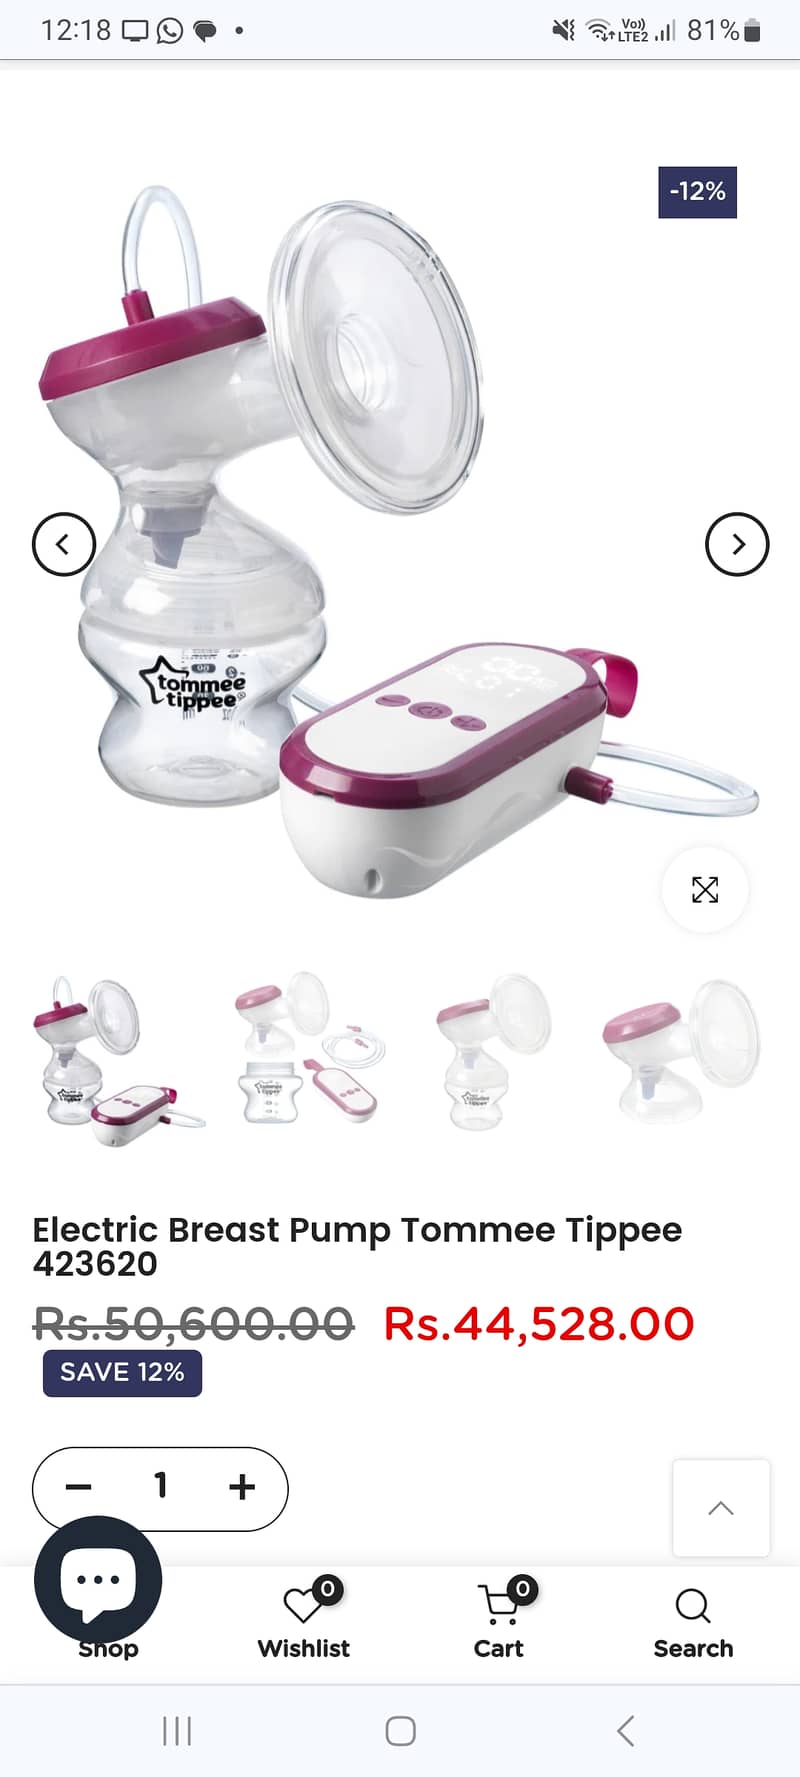 Tomee tippee electric breast pump for sale 4